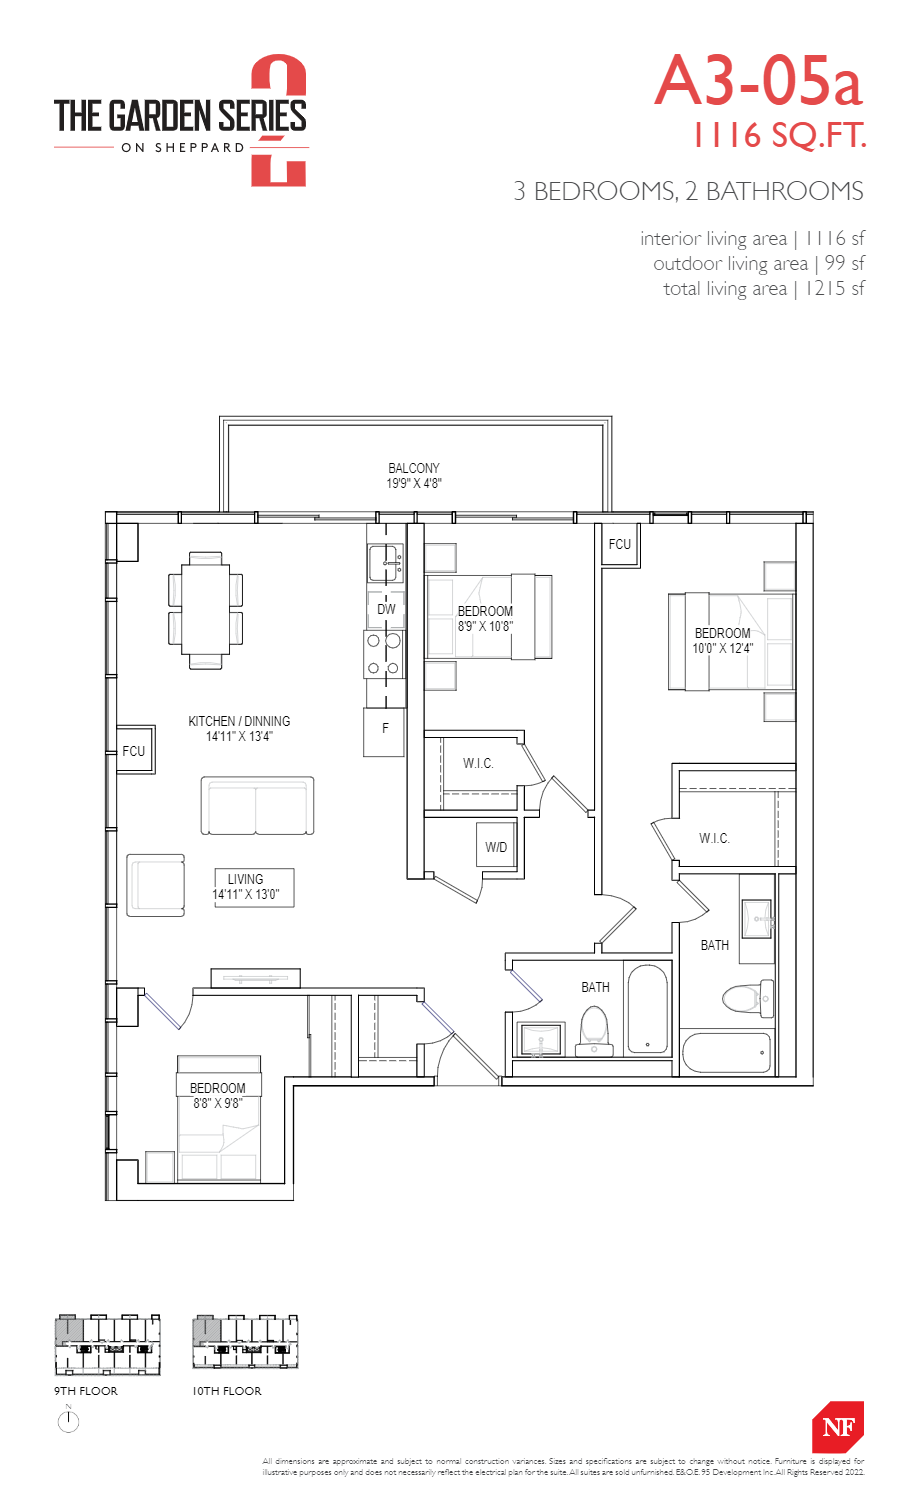 A3-05A Floor Plan of The Garden Series 2 on Sheppard Condos with undefined beds